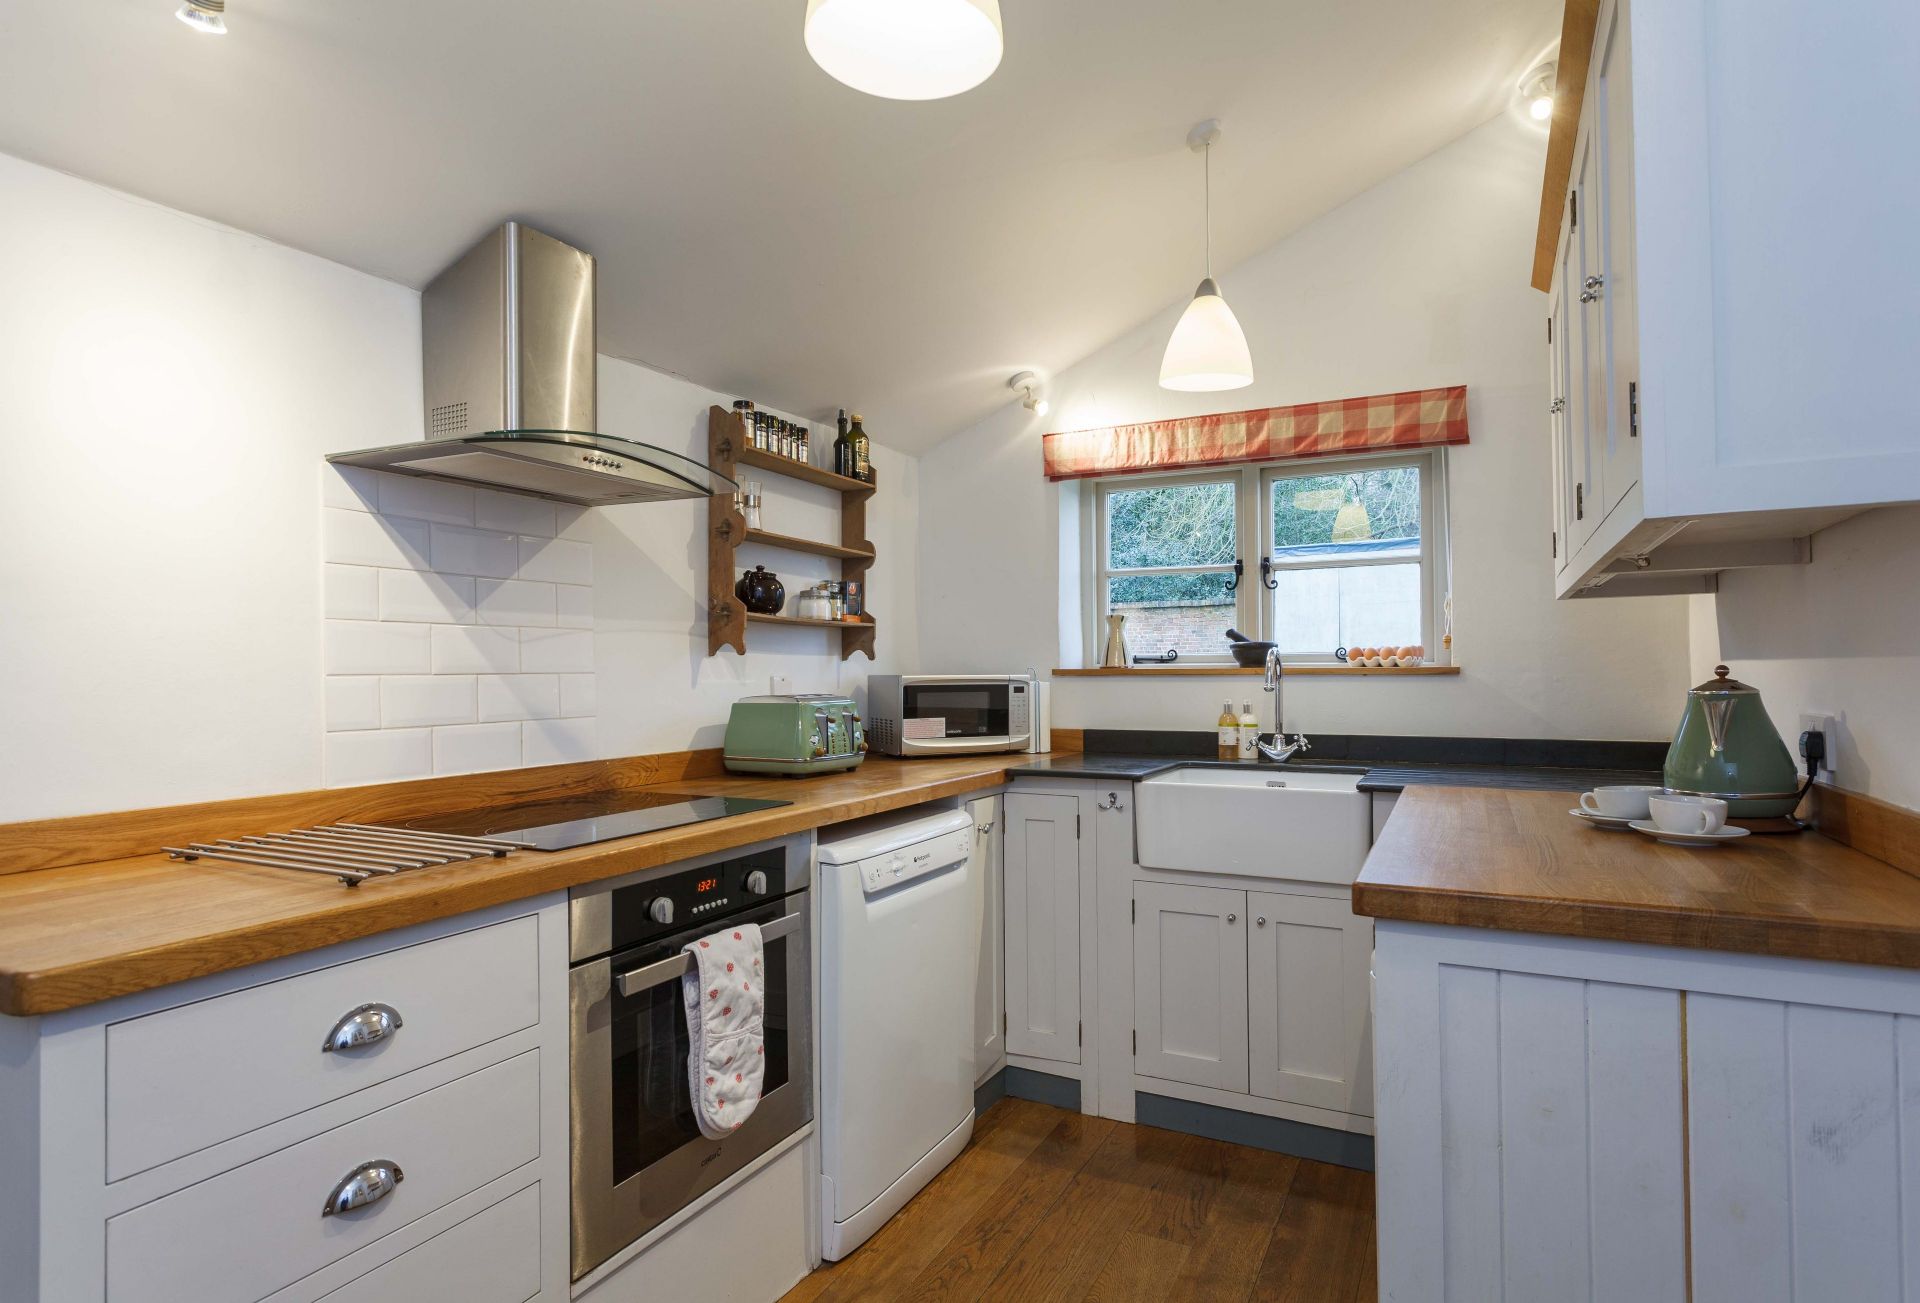 Plum Cottage is located in Wimborne and surrounding villages